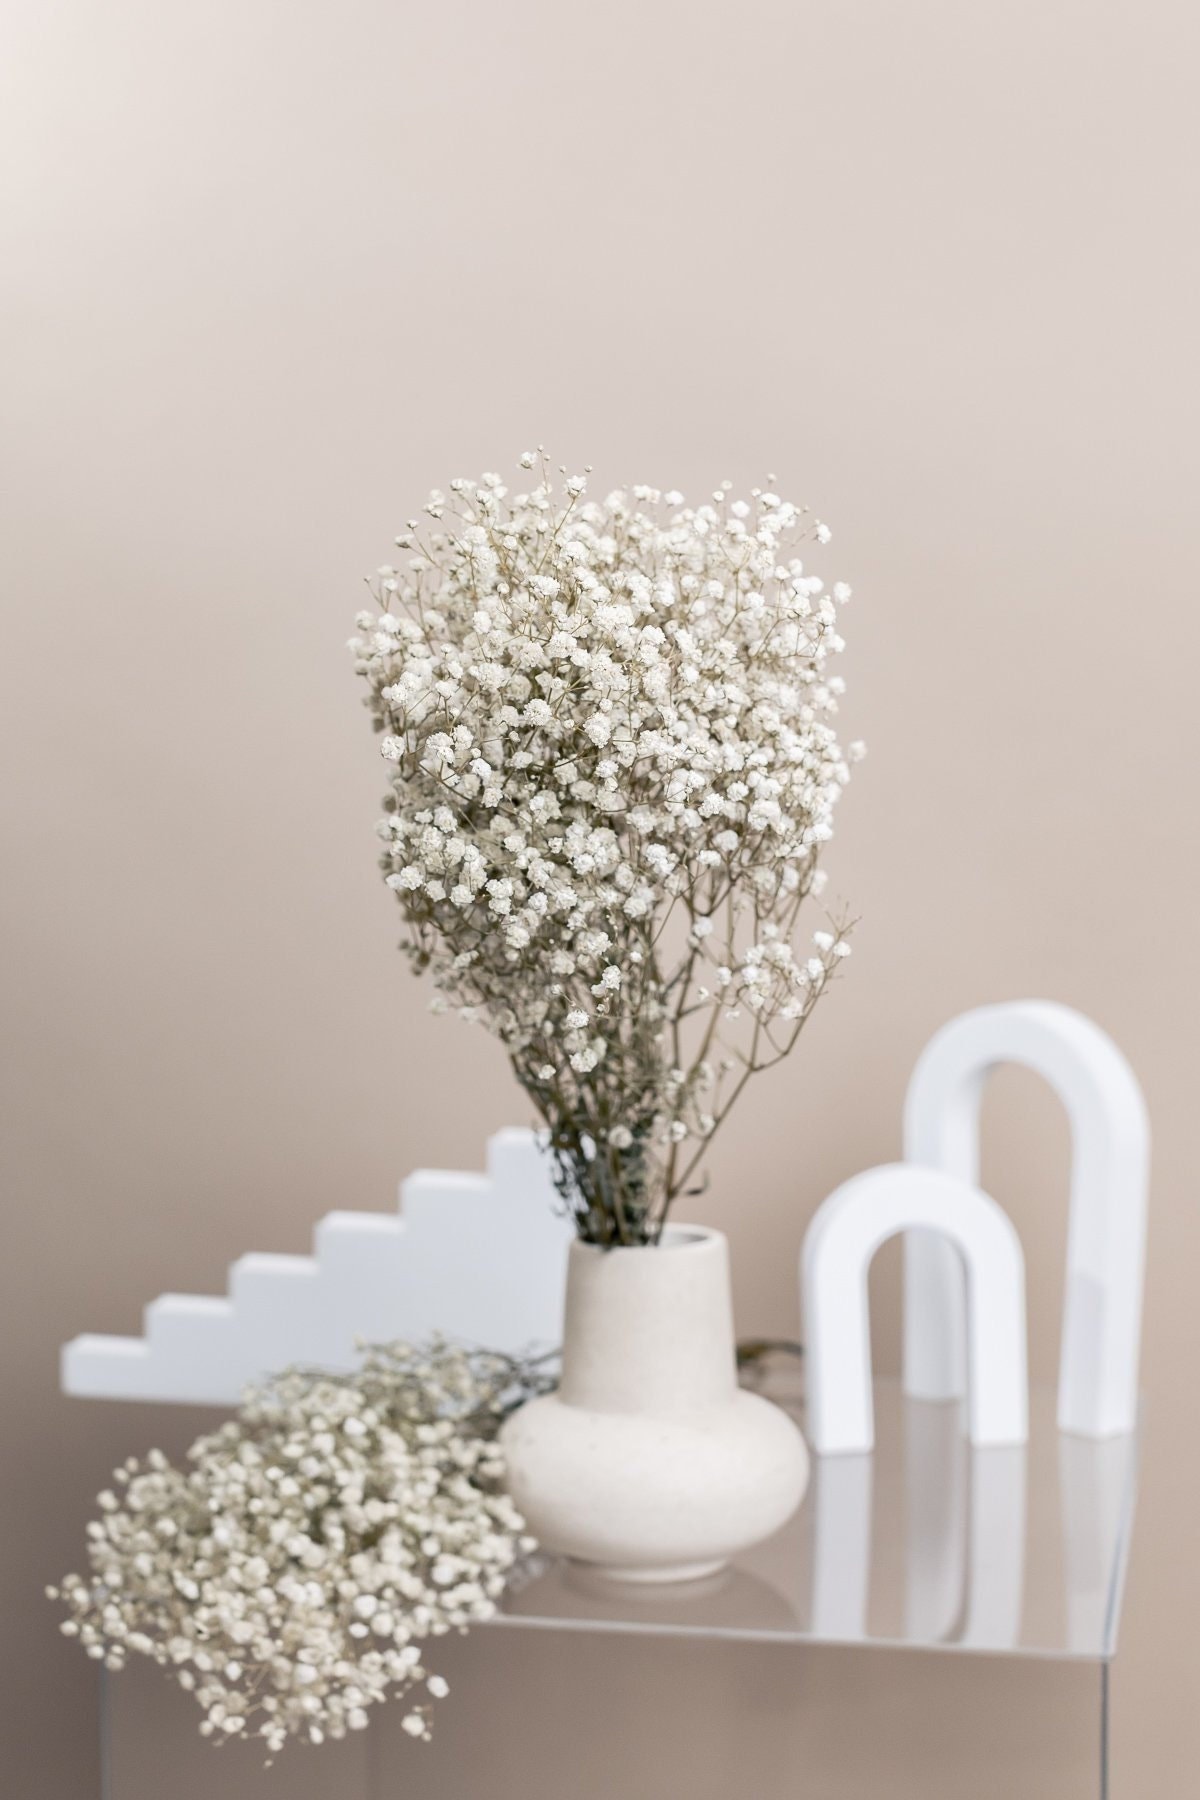 2500+ Dried Babys Breath Flowers Bouquet - Natural White Dry Flowers Bulk